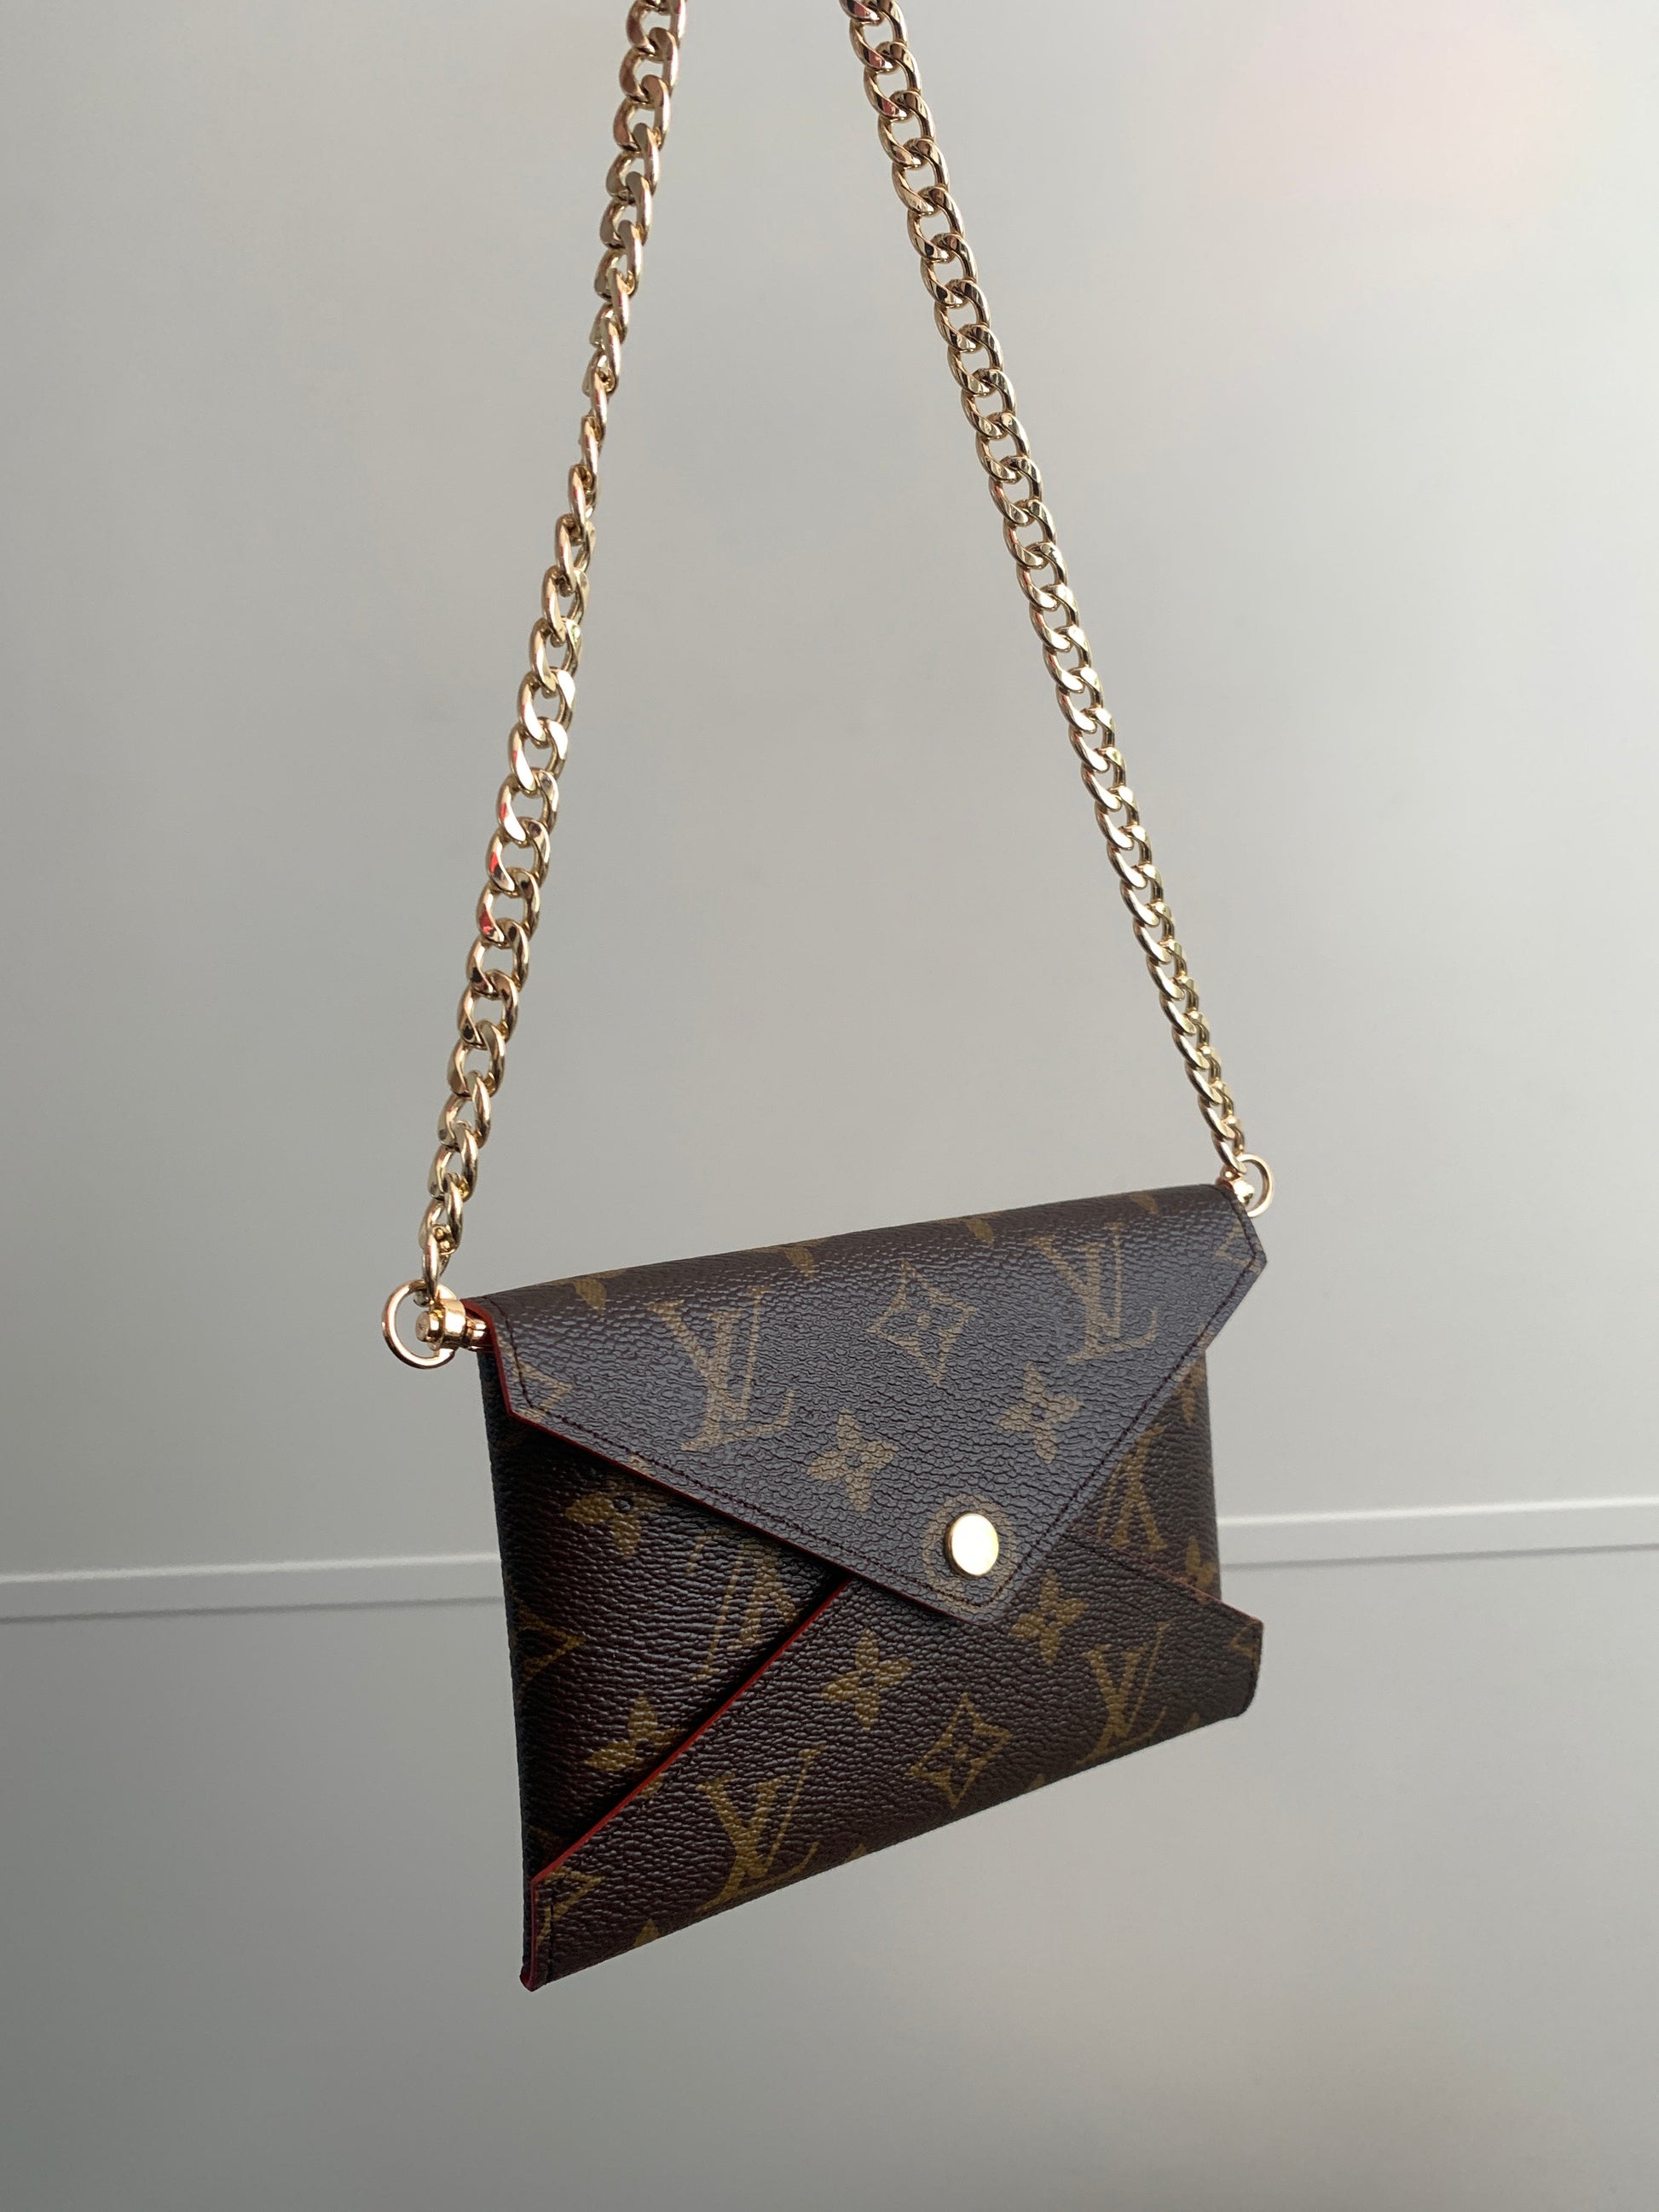 Louis Vuitton Kirigami Pochette Insert Conversion Kit Lining With Gold Chain